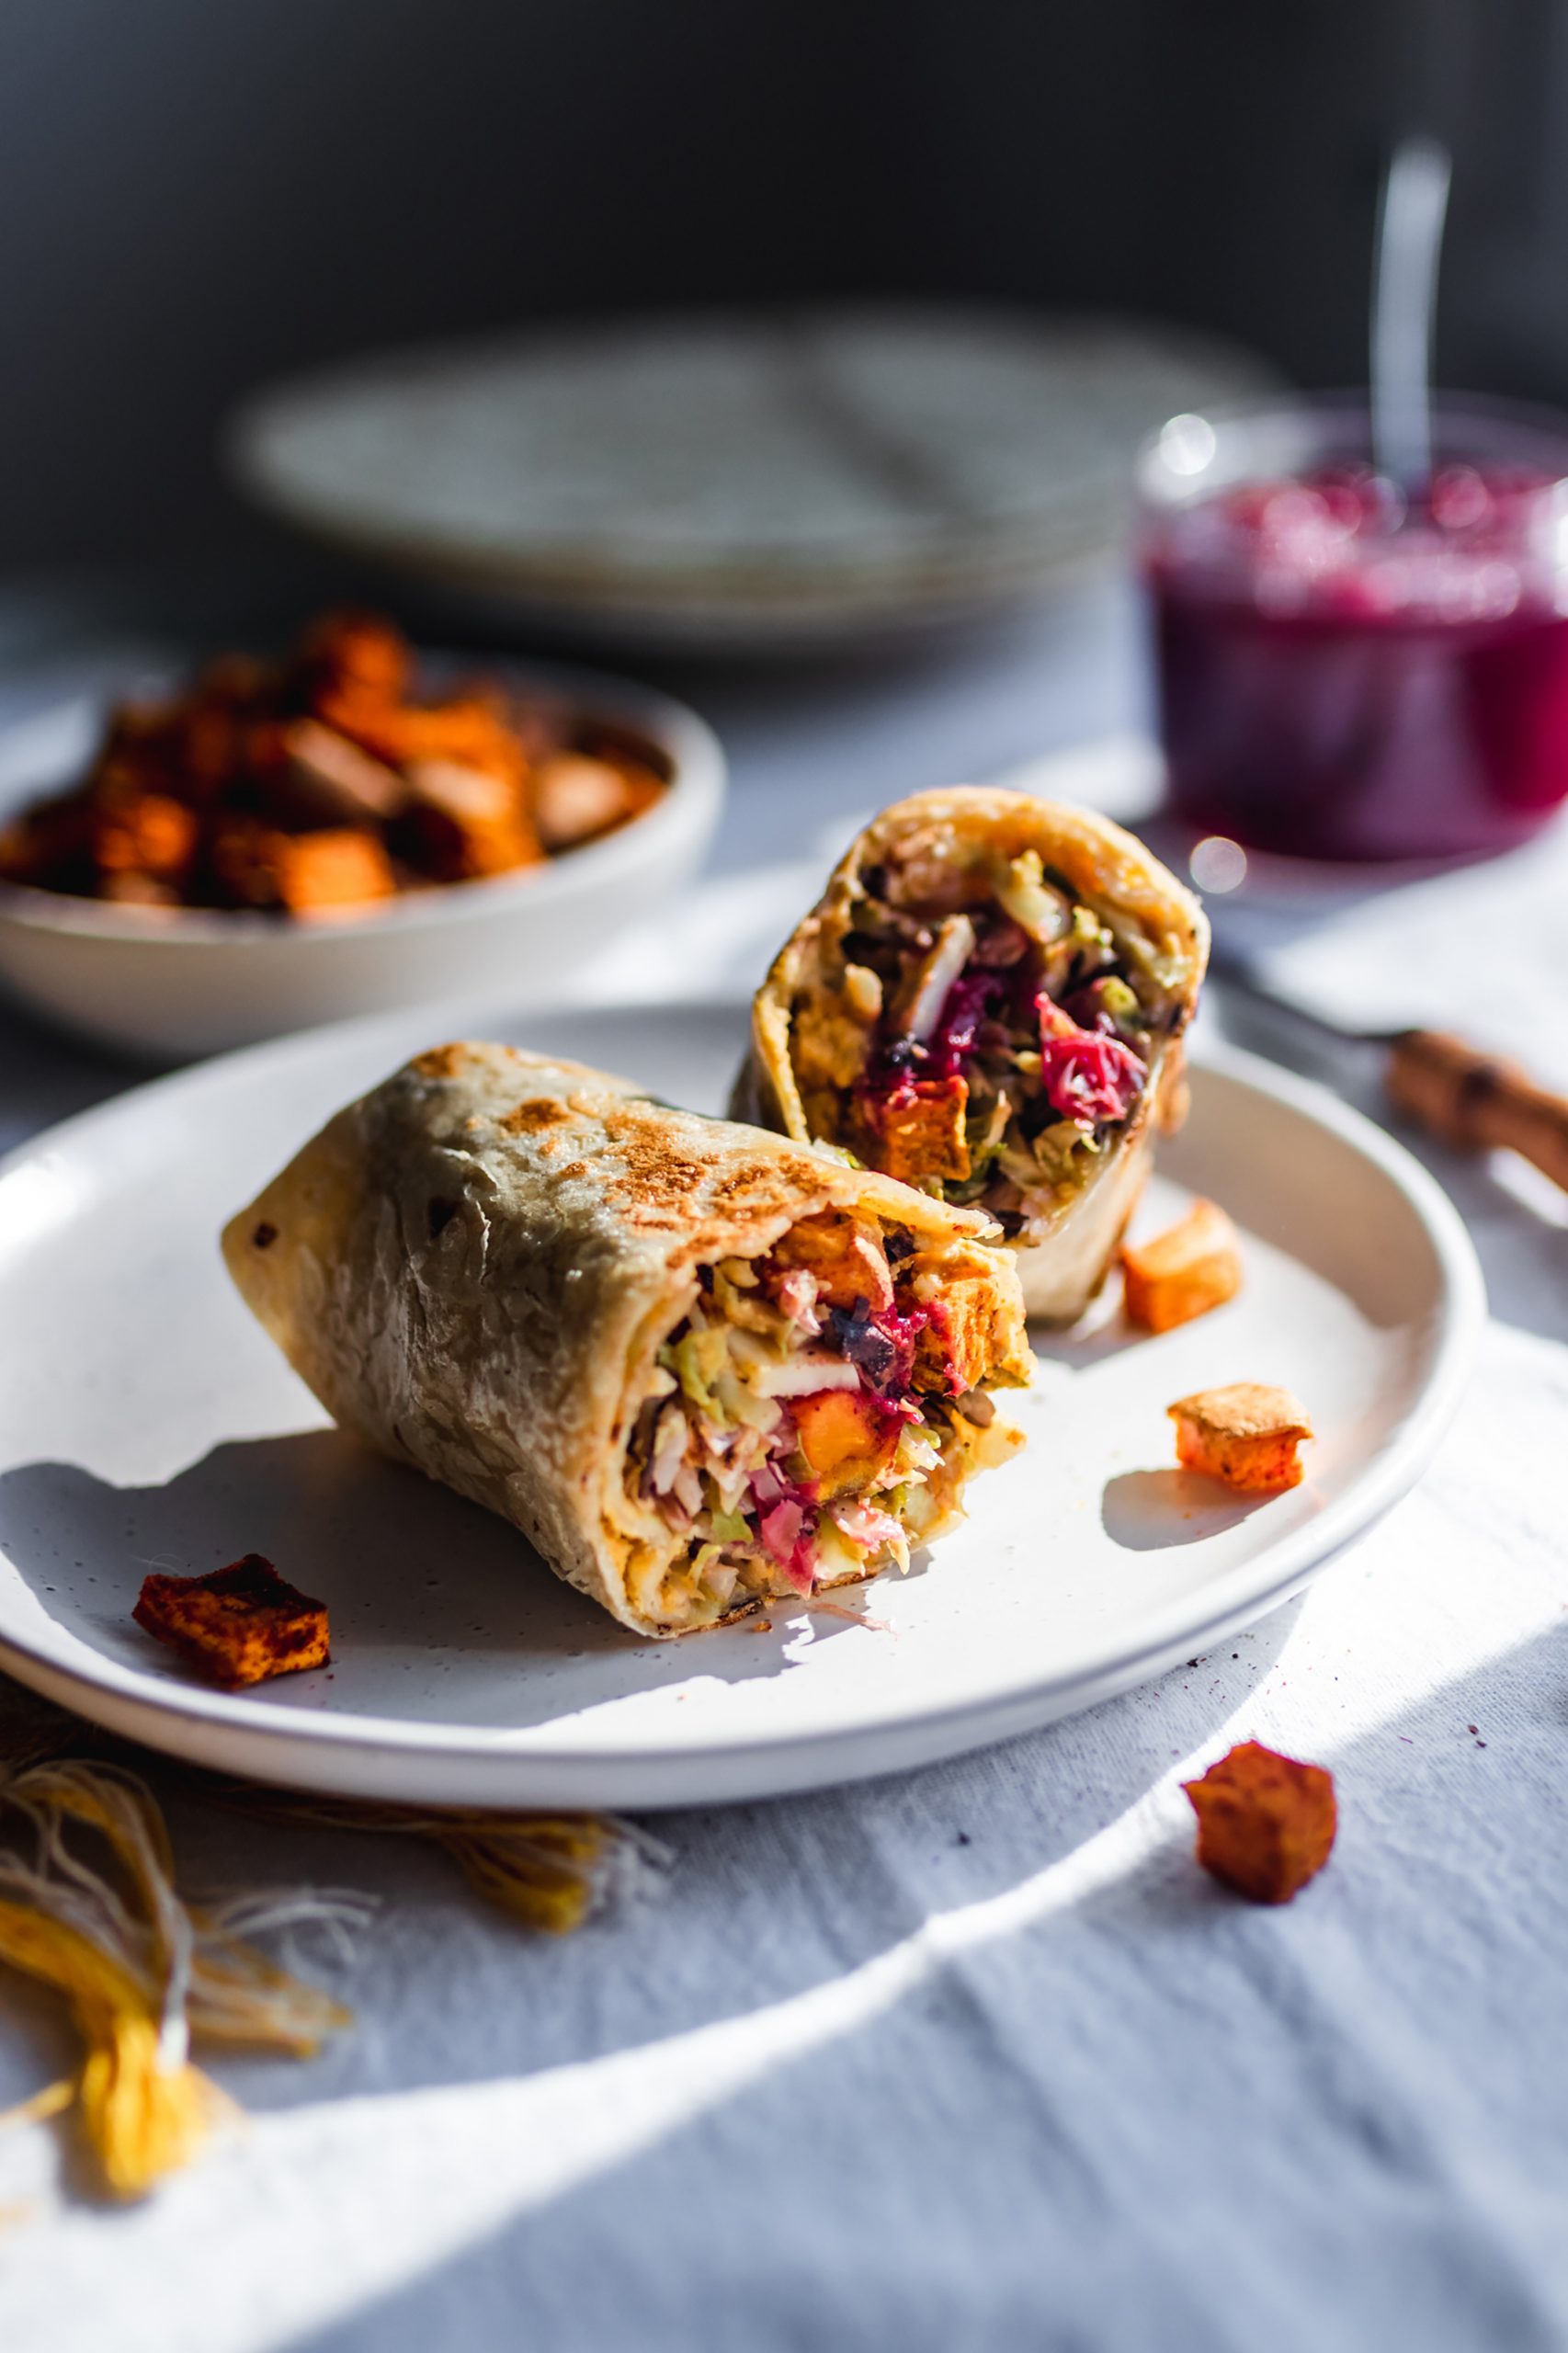 Vegan wrap cut in half, stuffed with squash, brussels sprouts, cranberries, sweet potatoes item-snippet-recipe apples